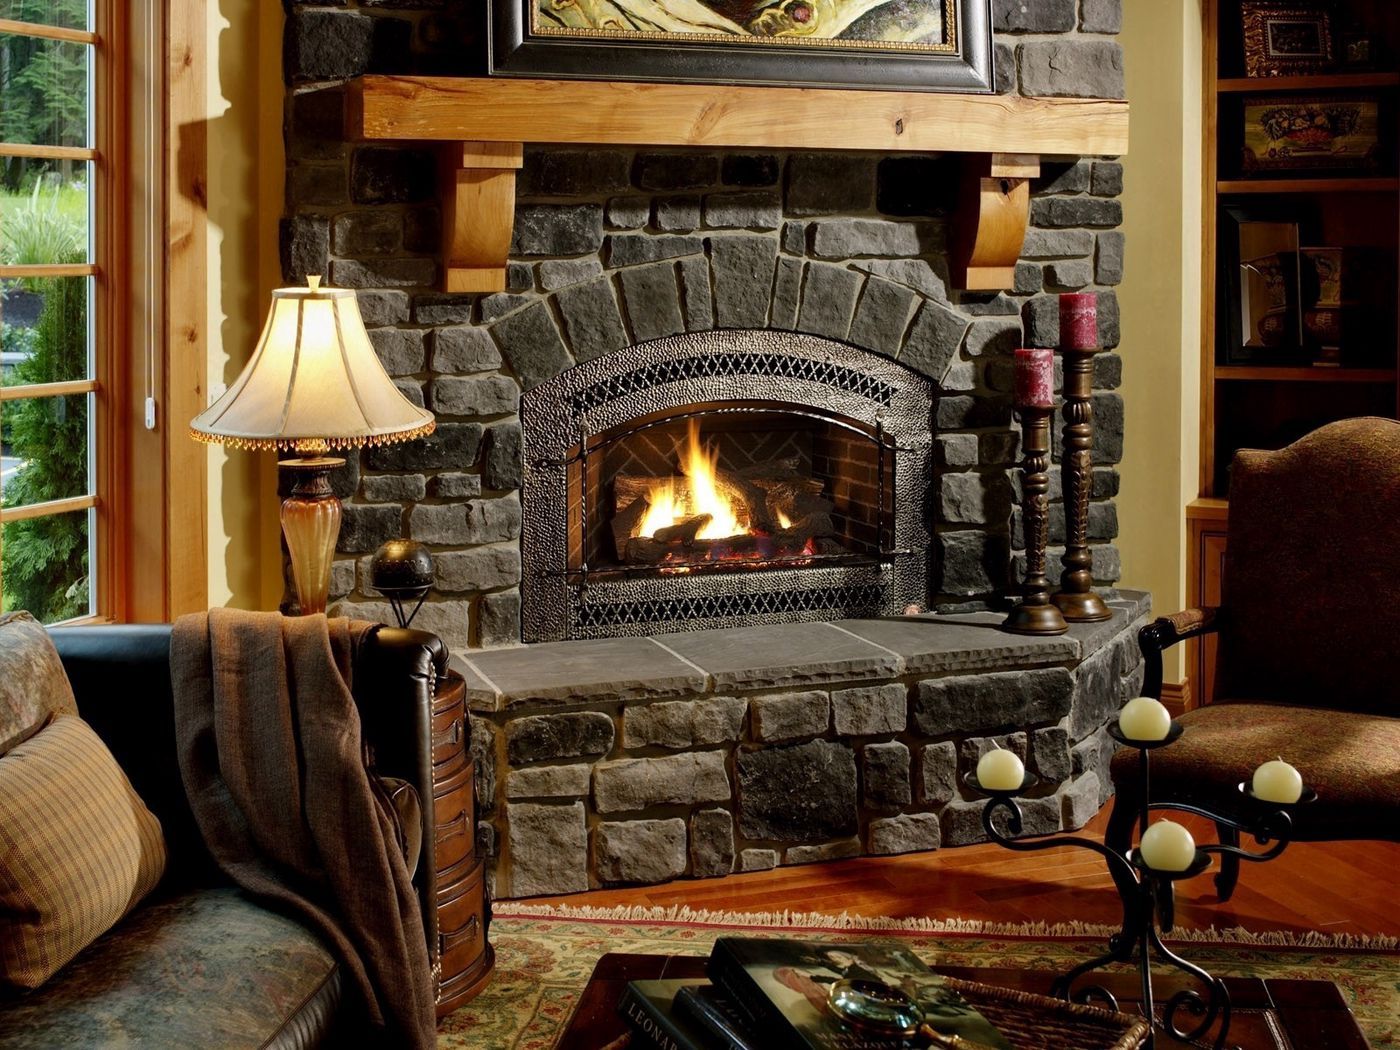 Download wallpaper 1400x1050 fireplace, chair, comfort, evening, cozy atmosphere standard 4:3 HD background